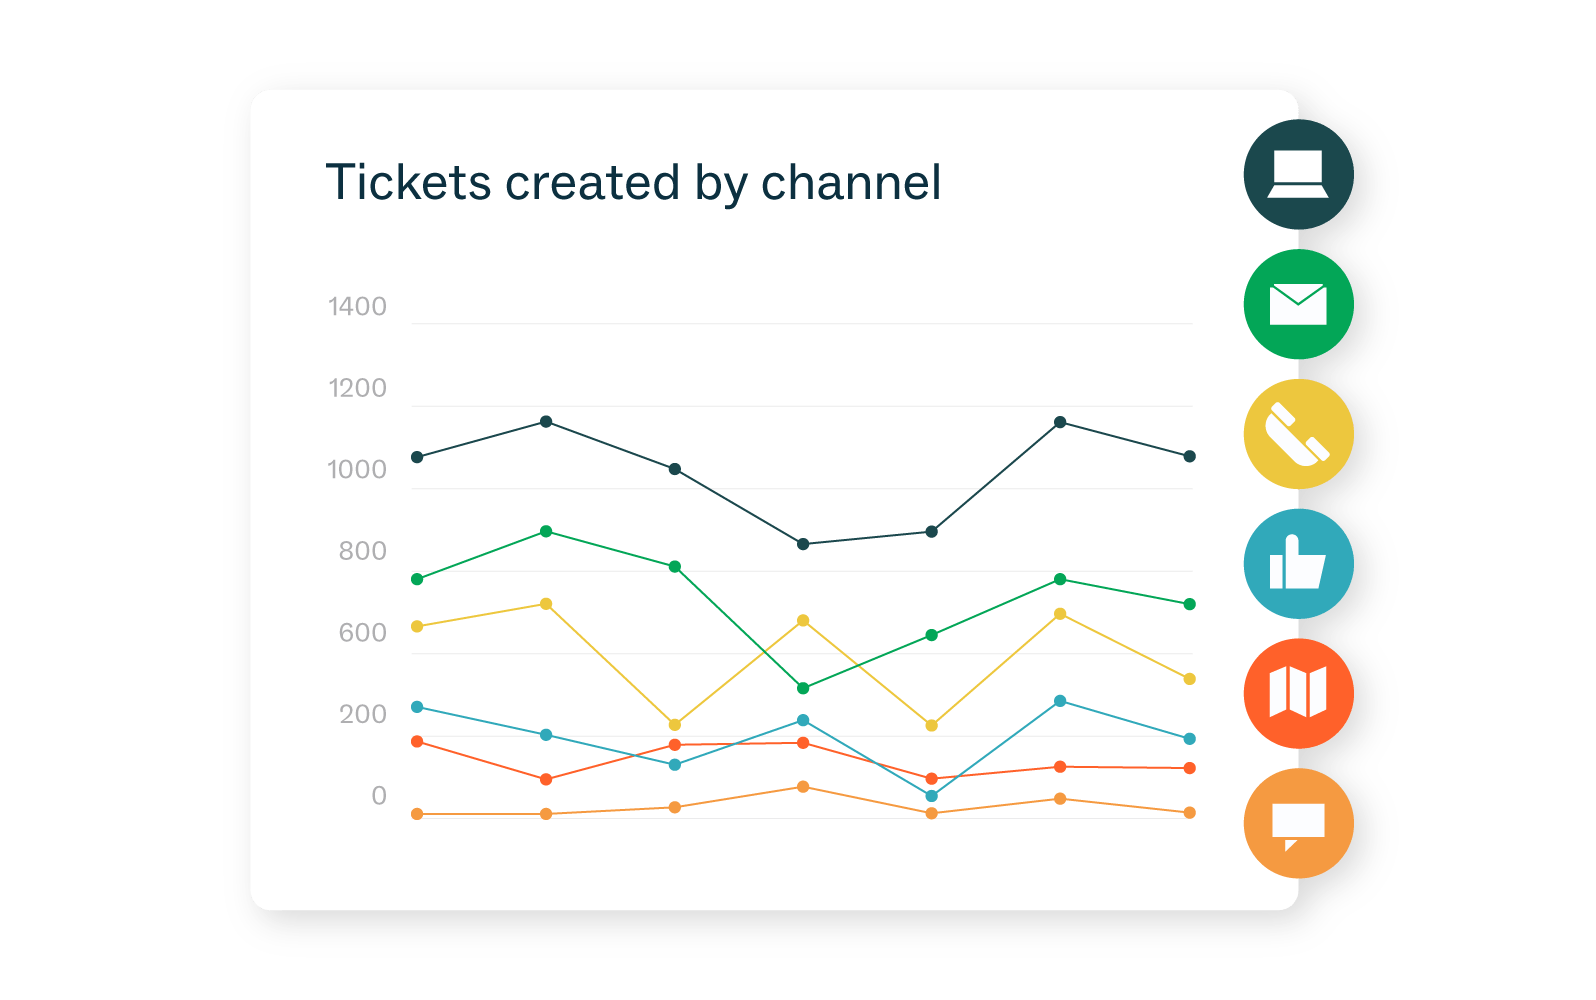 A screenshot from the Zendesk reporting dashboard shows a line graph for tickets created by channel.